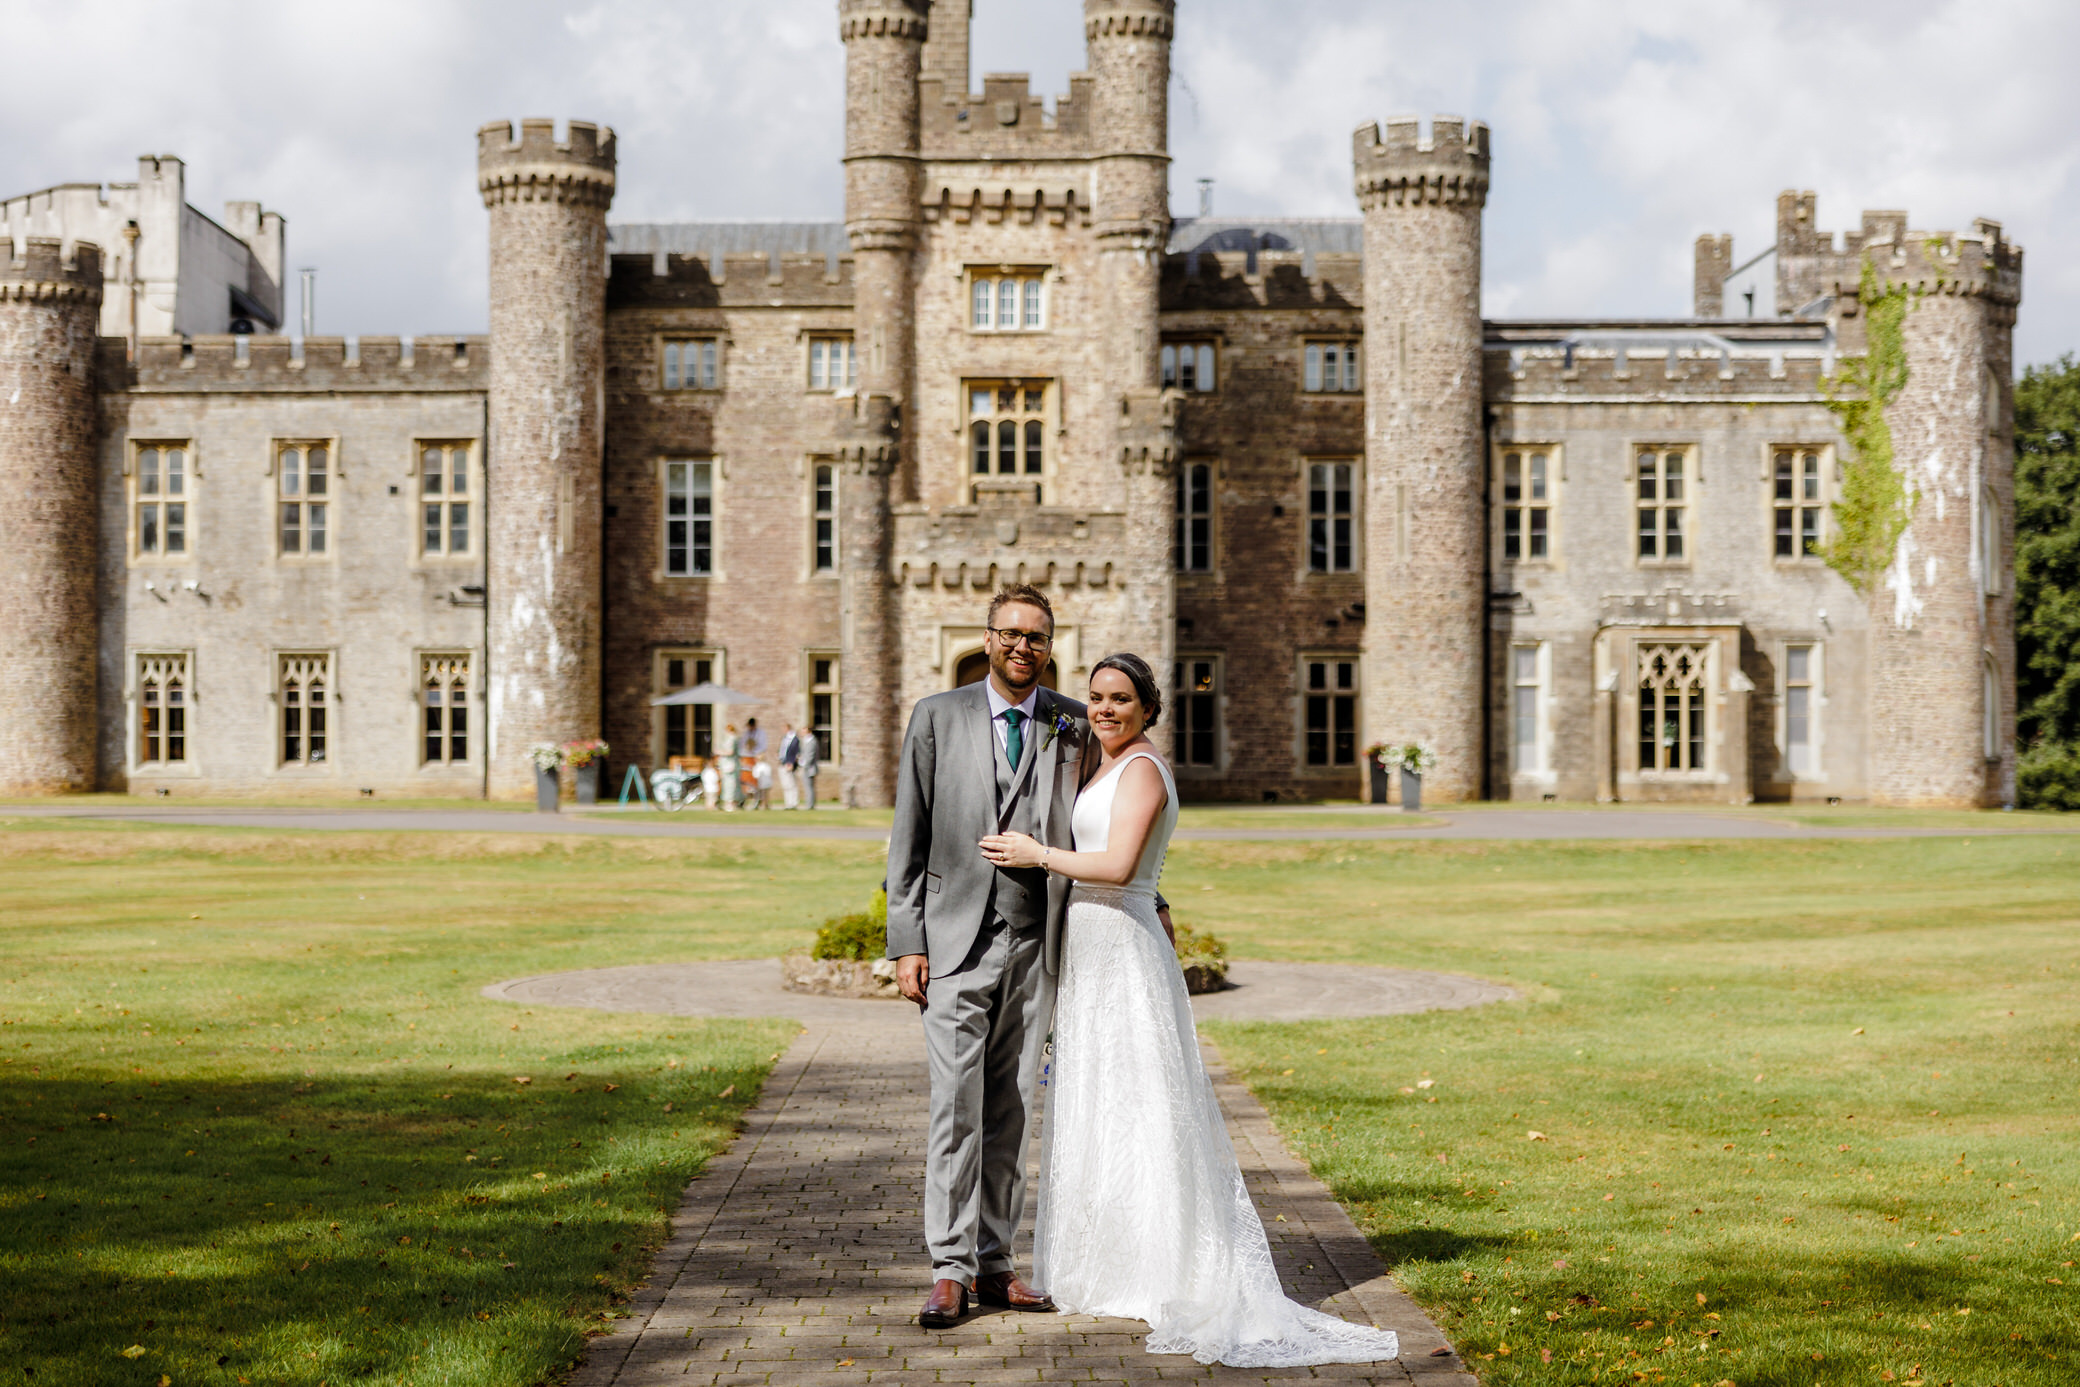 Hensol Castle Wedding - Bride and Groom in front of Castle